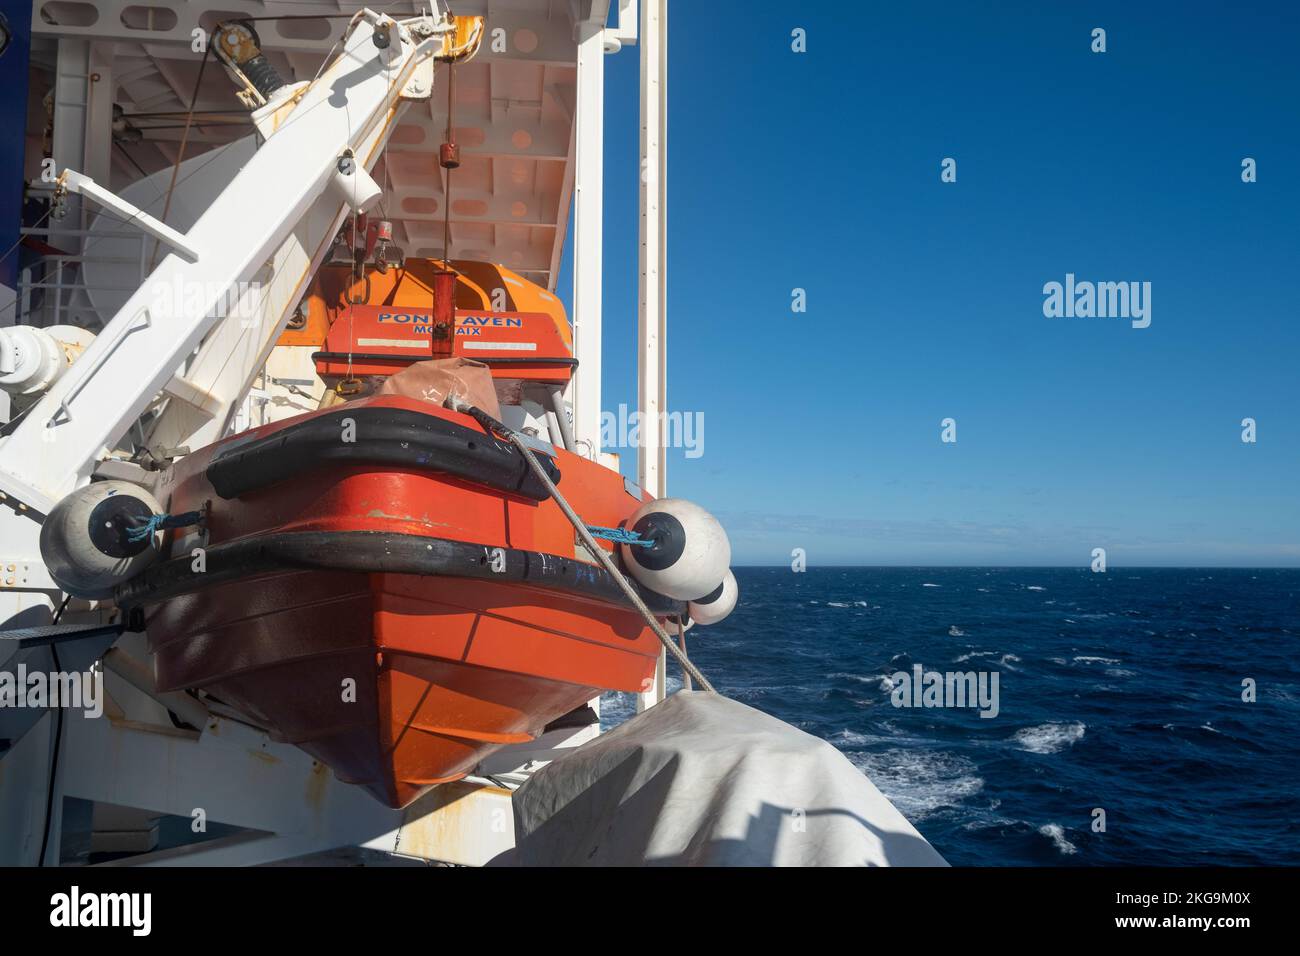 Santander, Spain. 20th October 2022. Emergency lifeboat in its ready stowed position onboard the Brittany Ferries Pont Aven cruise ship. Stock Photo